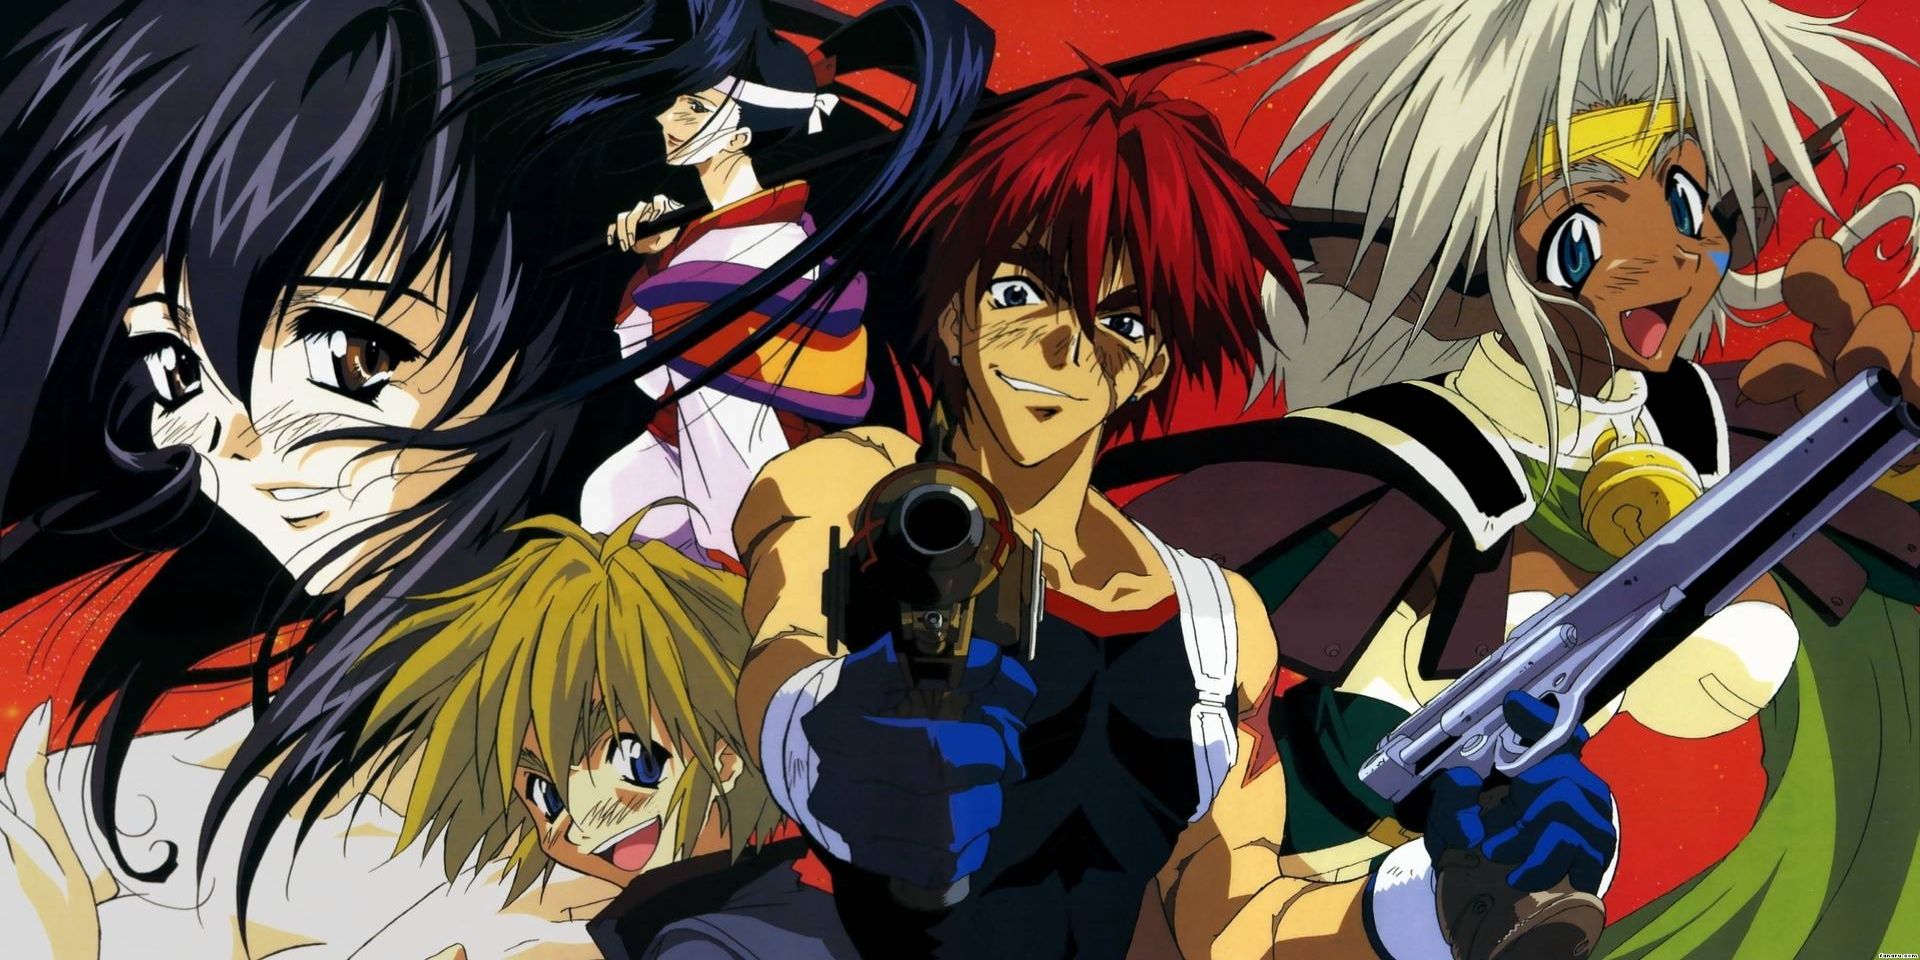 A cast of characters from the anime series Outlaw Star.